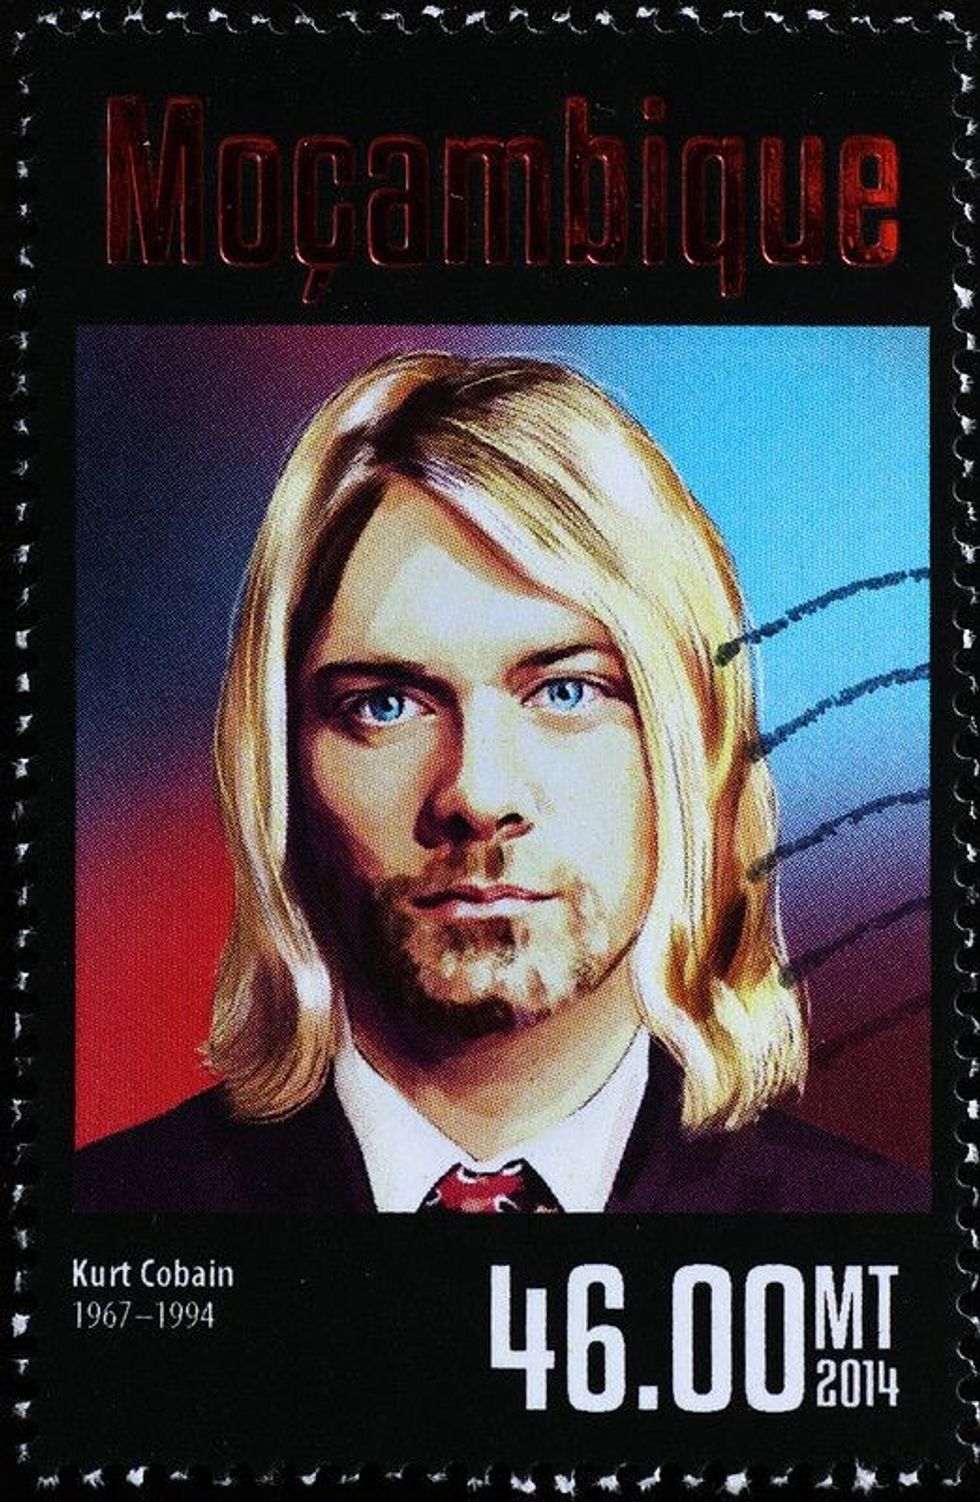 Kurt Cobain was a songwriter and musician who was a part of the band Nirvana.